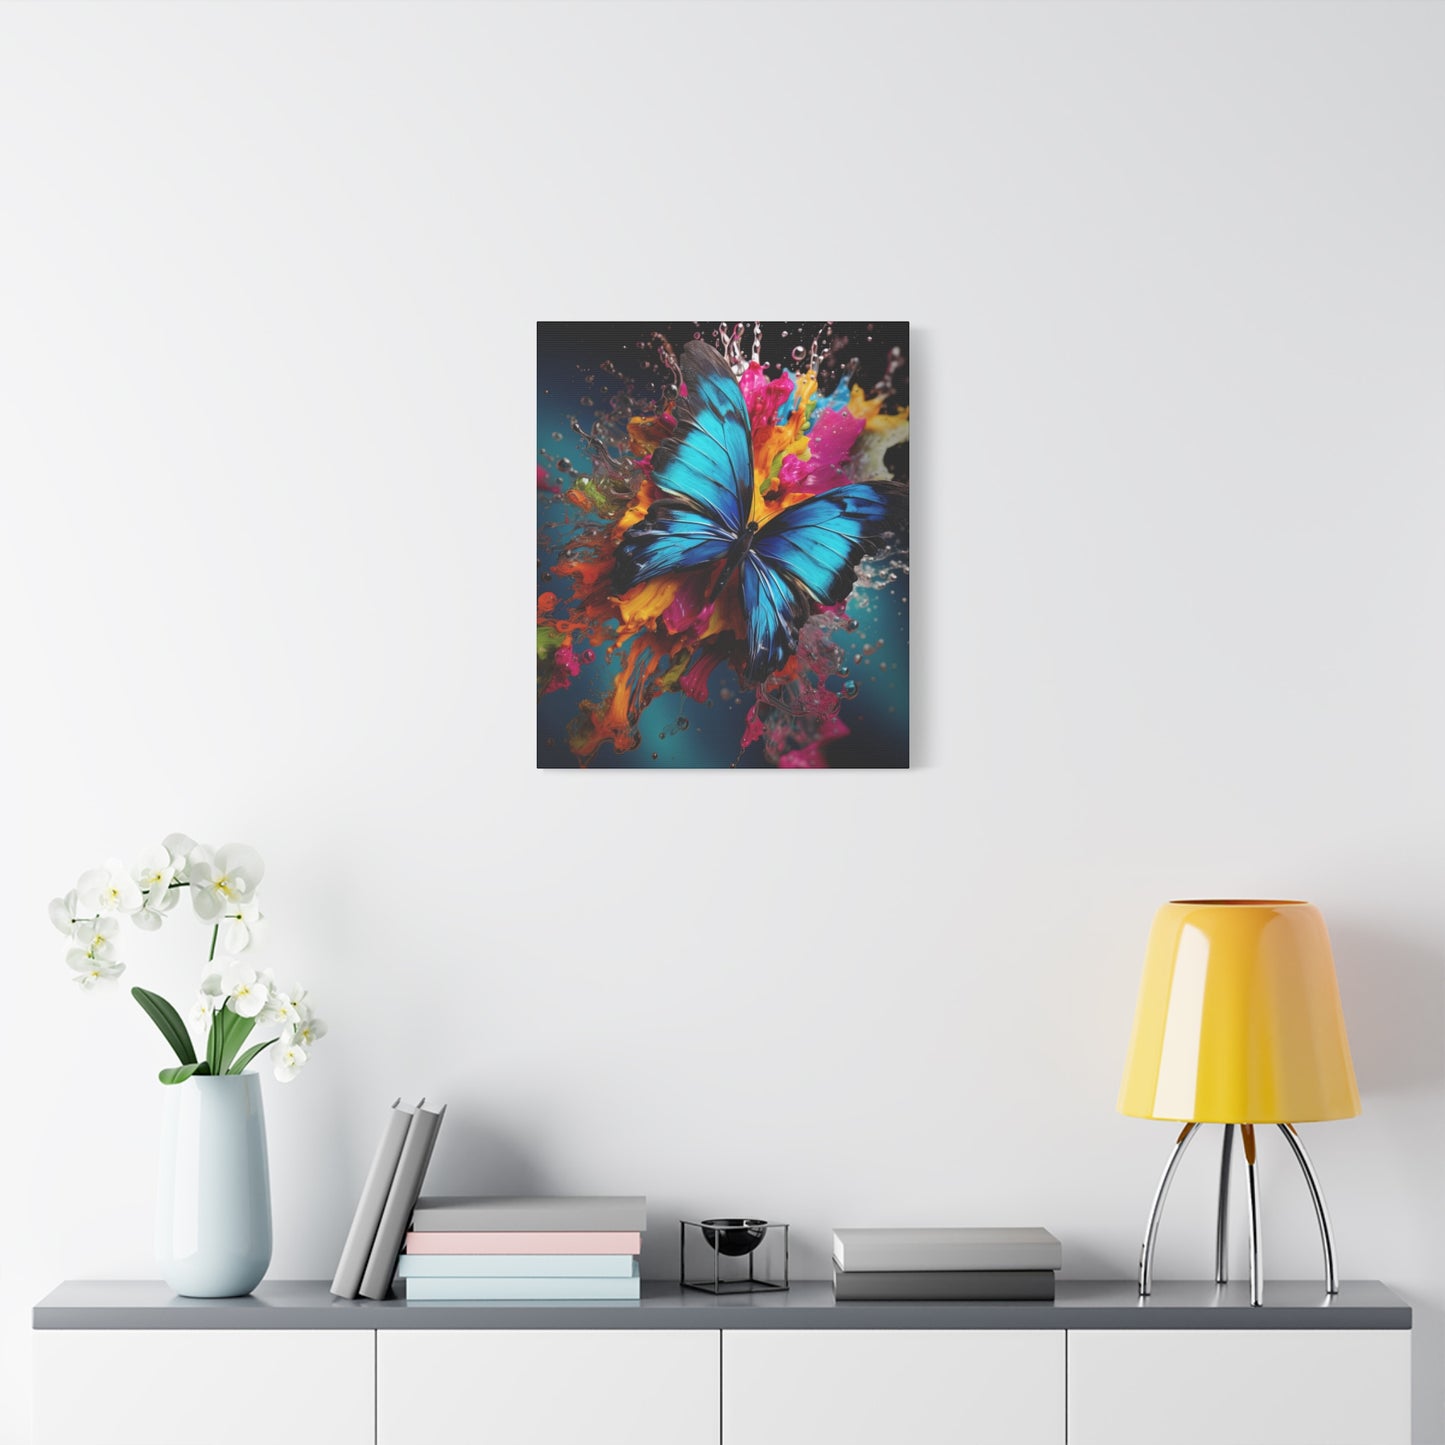 Butterfly Canvas Wall Art, Colorful Animal Print on Canvas, Butterfly Wall Decor, Bedroom Wall Decor, Home Gift, Room Decor